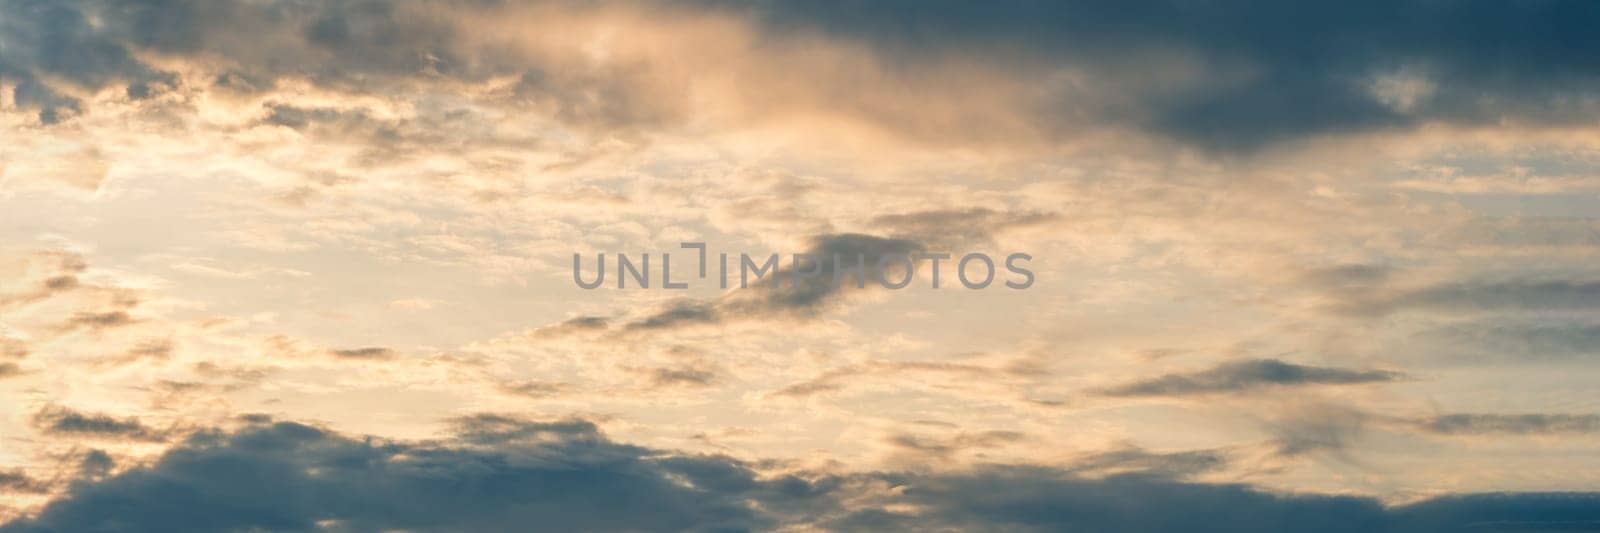 Abstract background sky Dawn Sunset Contrast dark shadow bright cloud sun orange silhouette above the mountains near the sea.